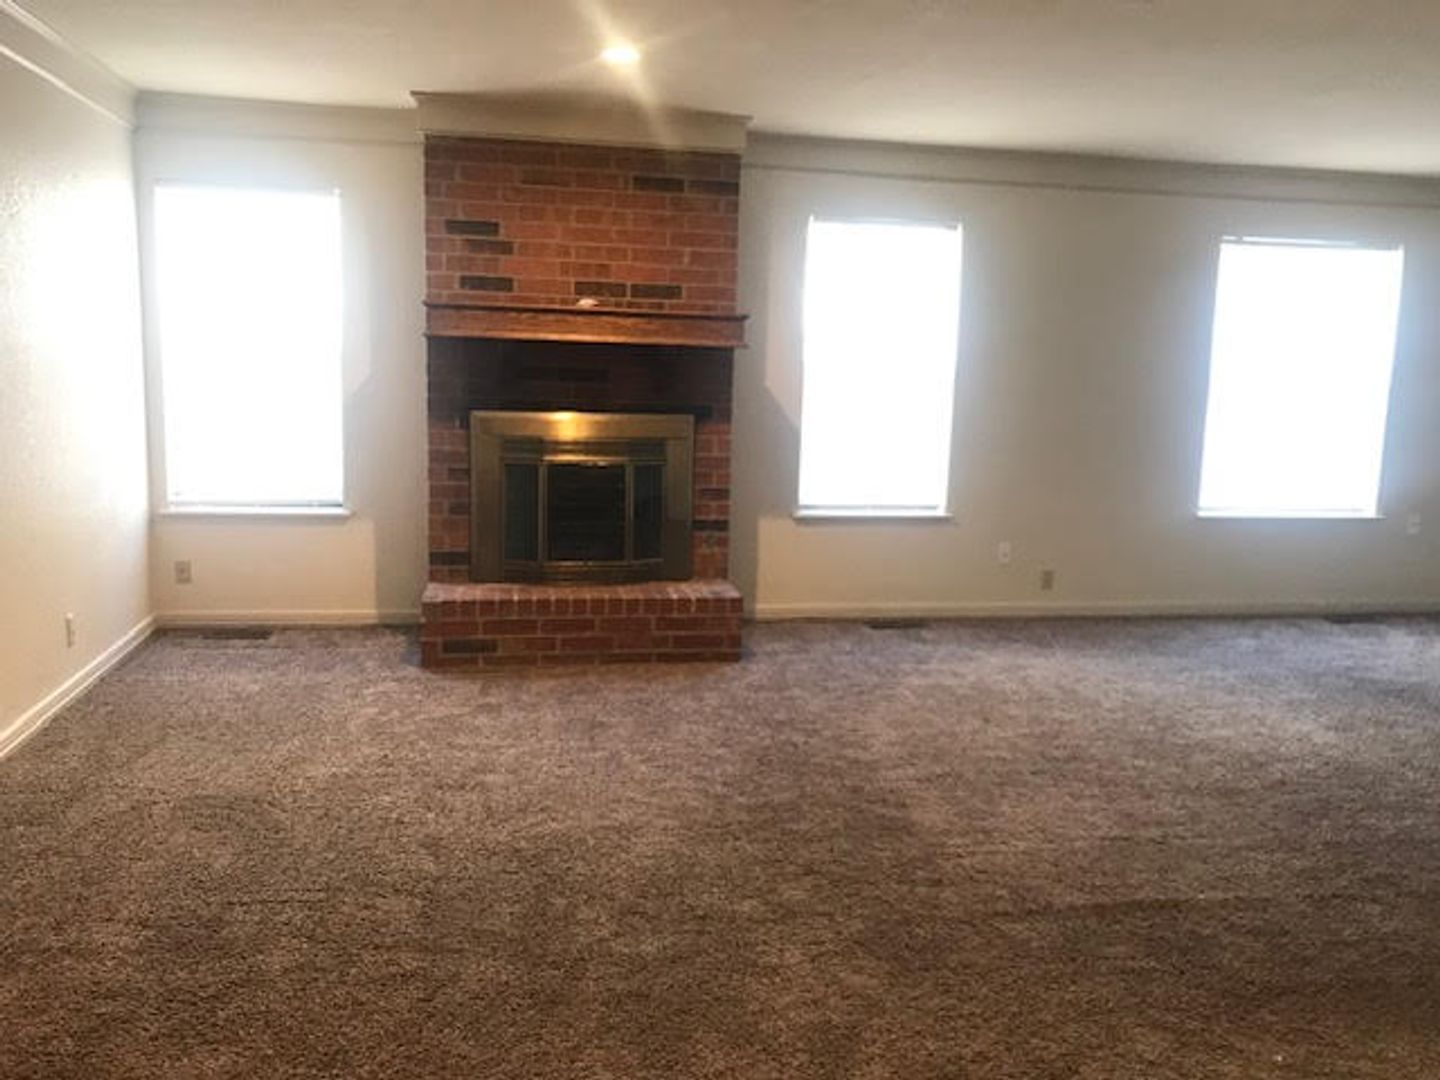 2 Masters - Lawn Care Provided  - 3 bds/3 baths